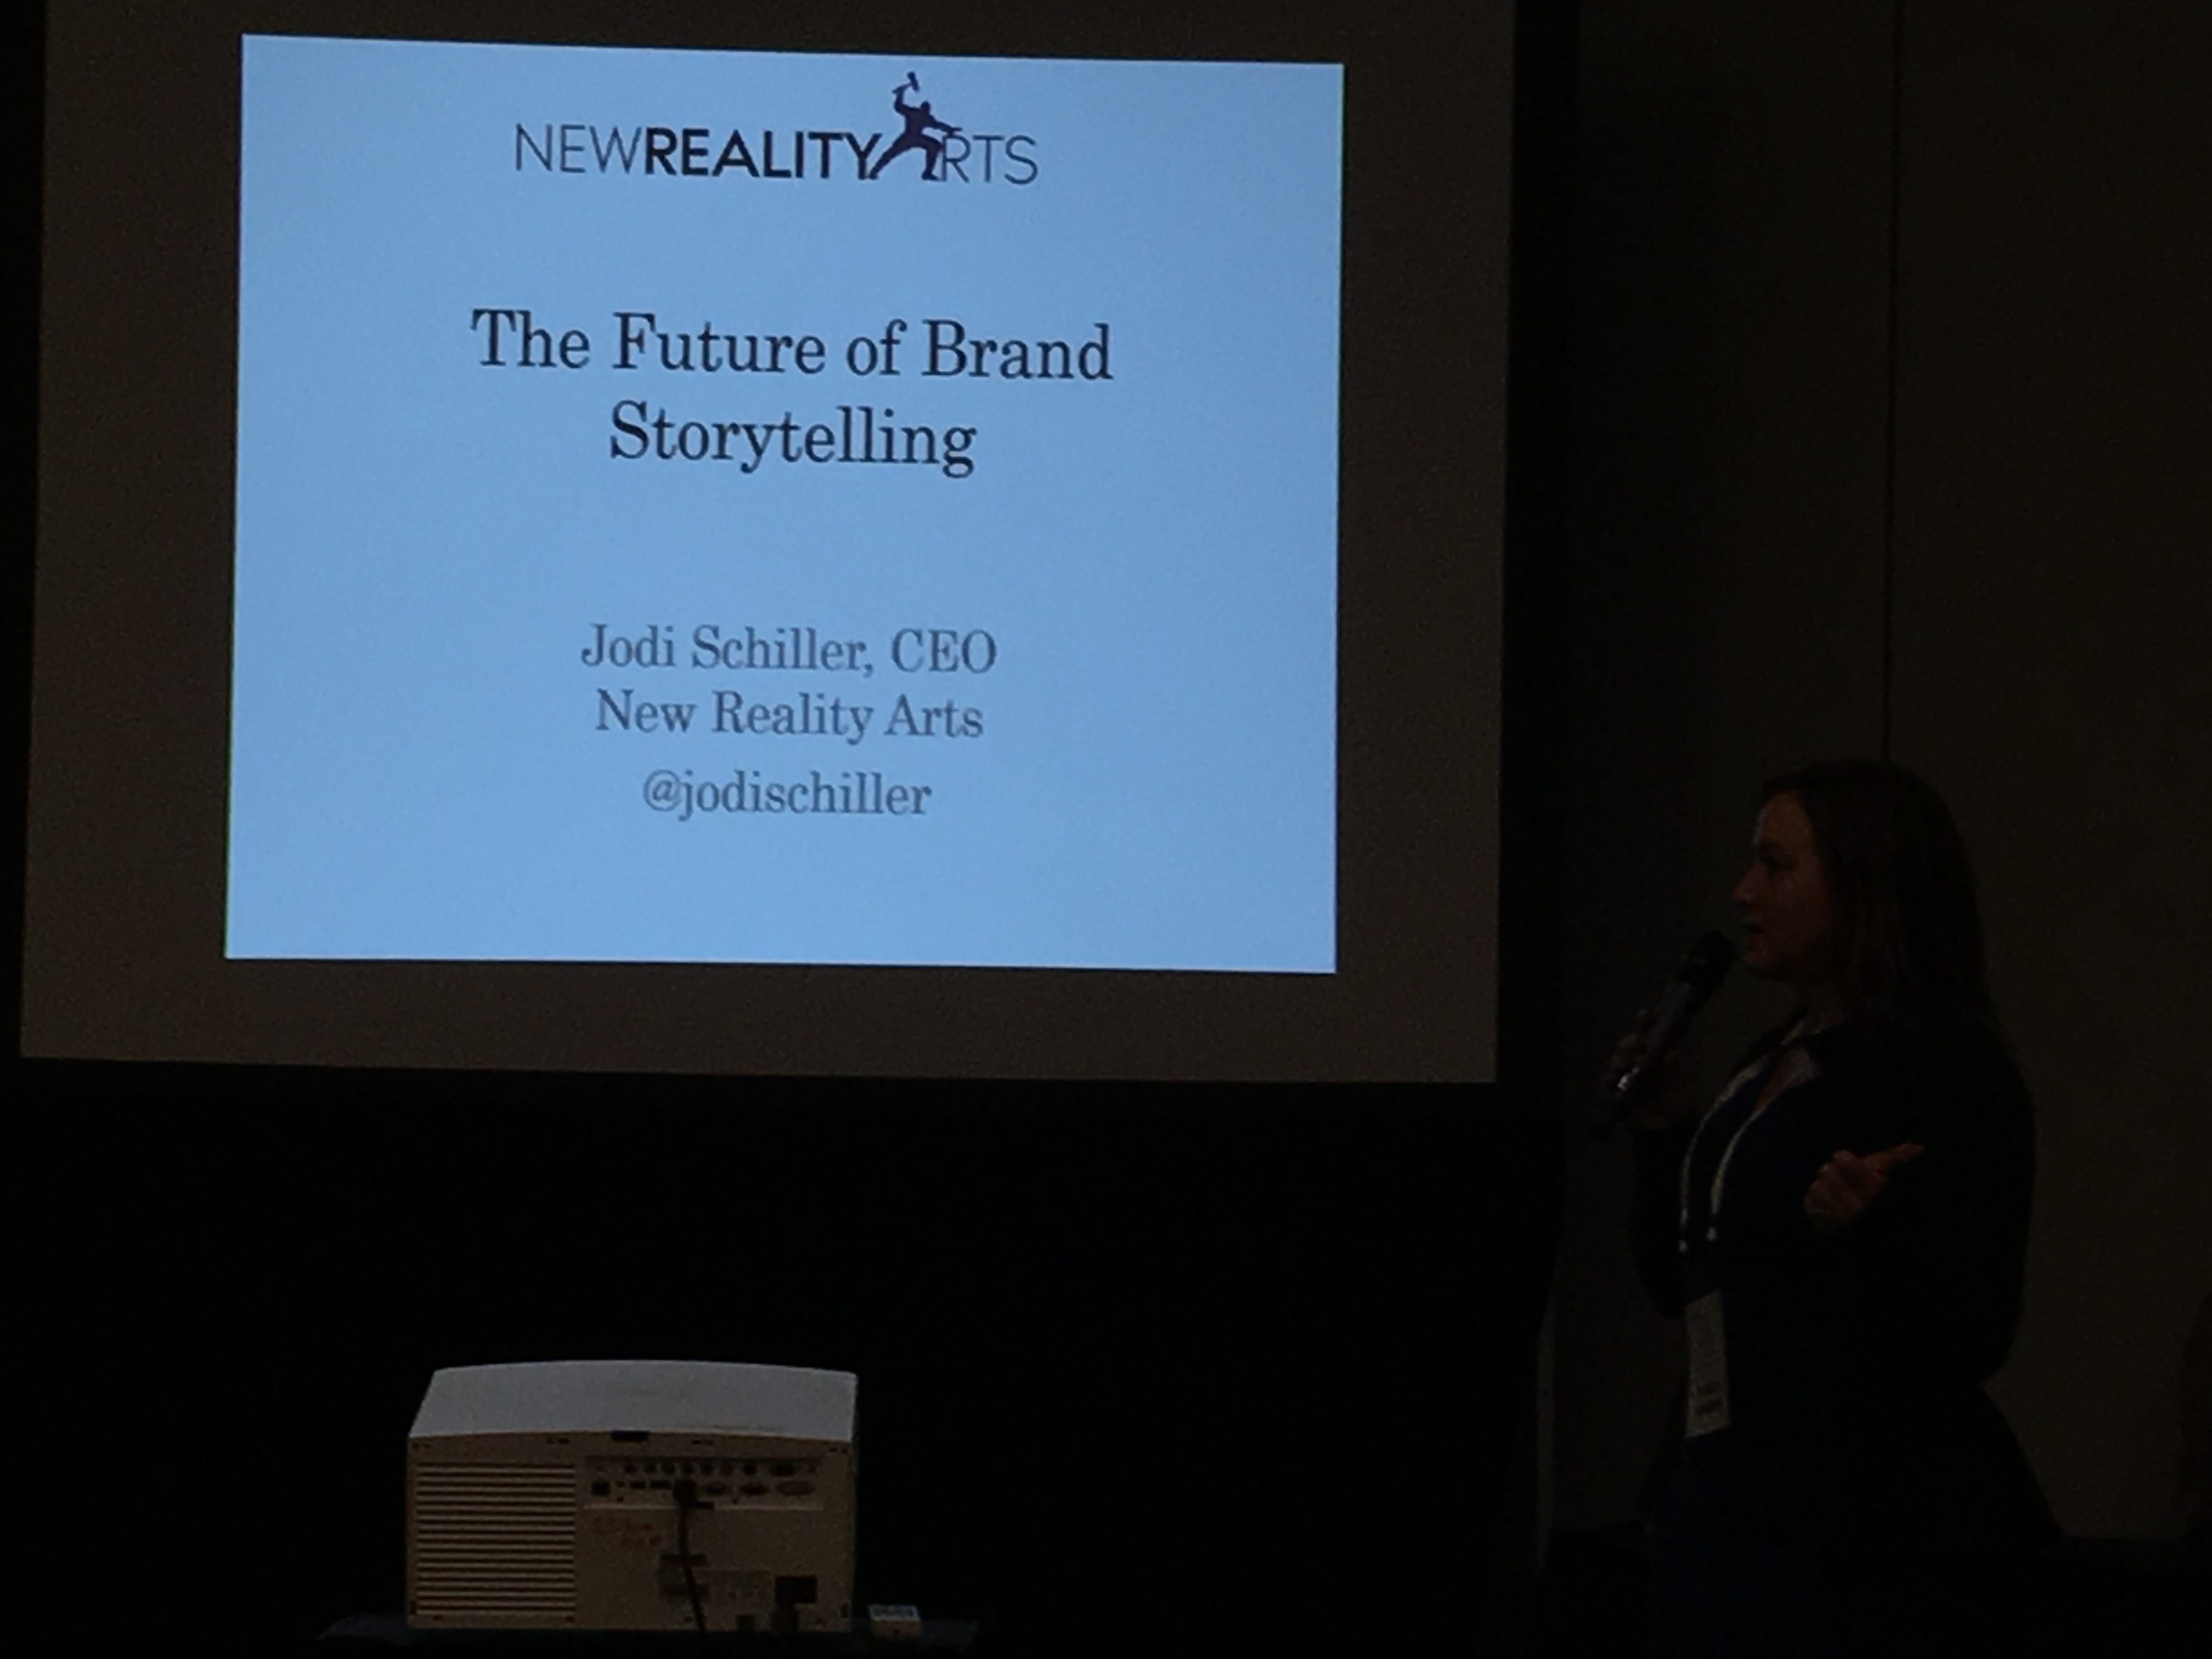 FLC at Virtual Reality Summit - VR in Marketing, Advertising and Branding